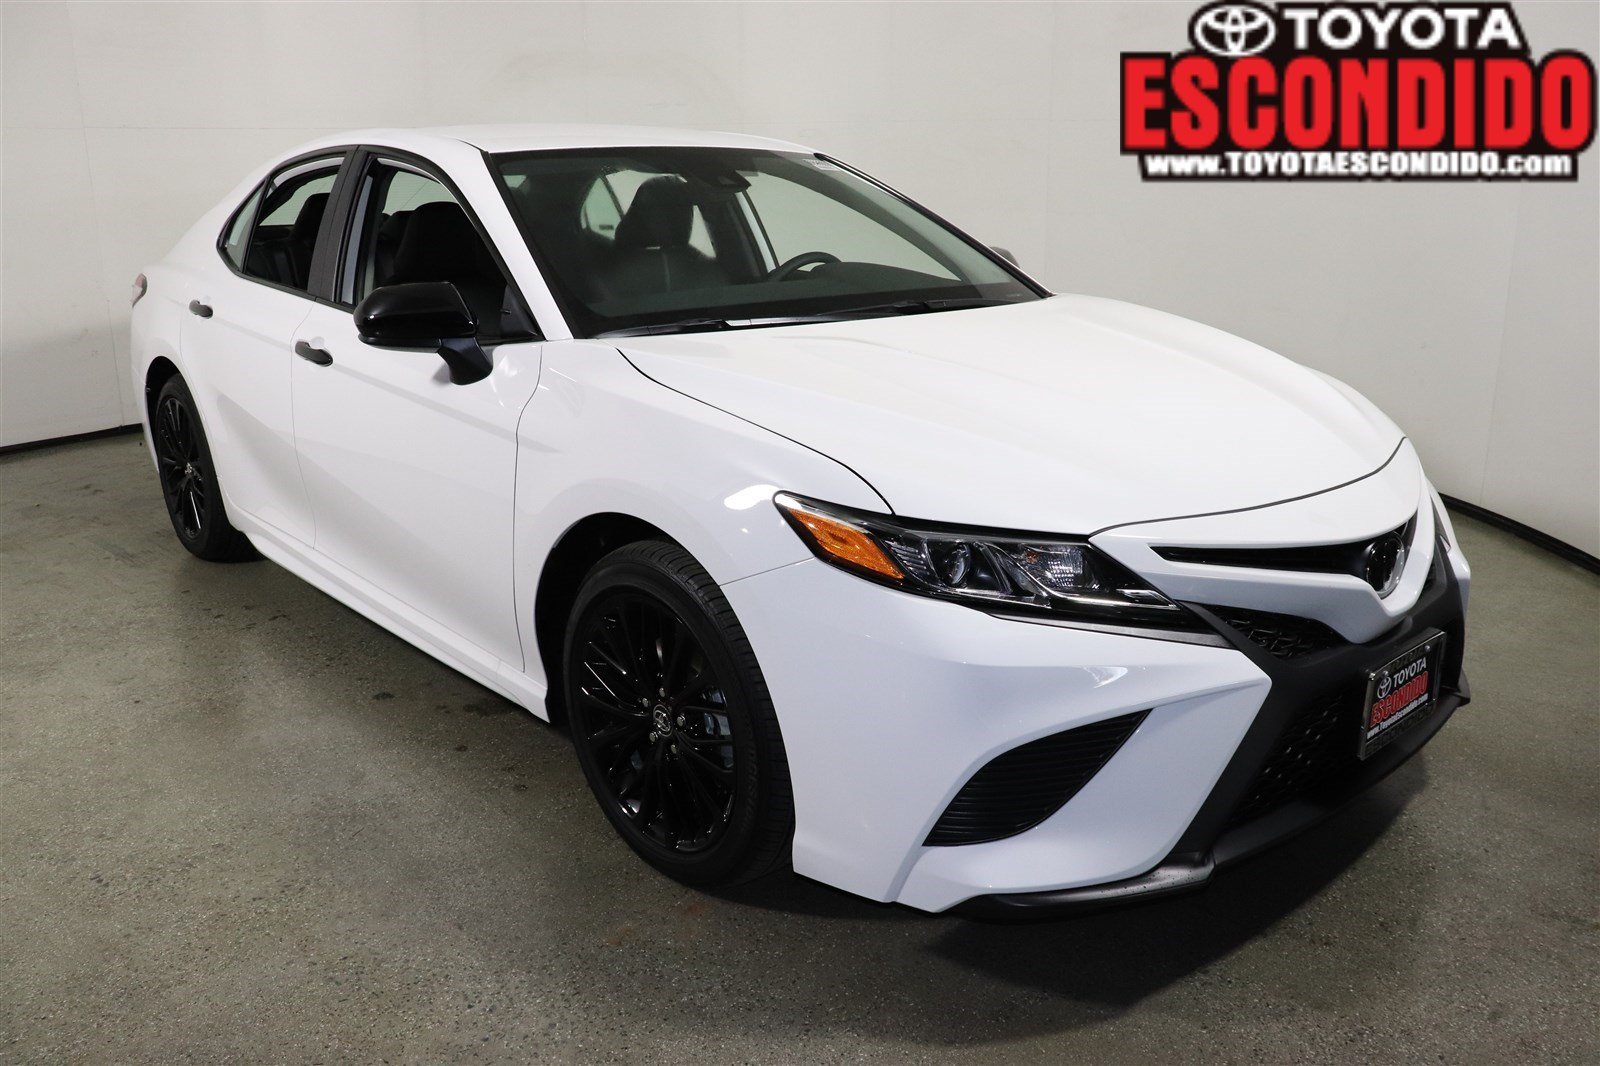 New 2020 Toyota Camry Se Nightshade Fwd 4dr Car